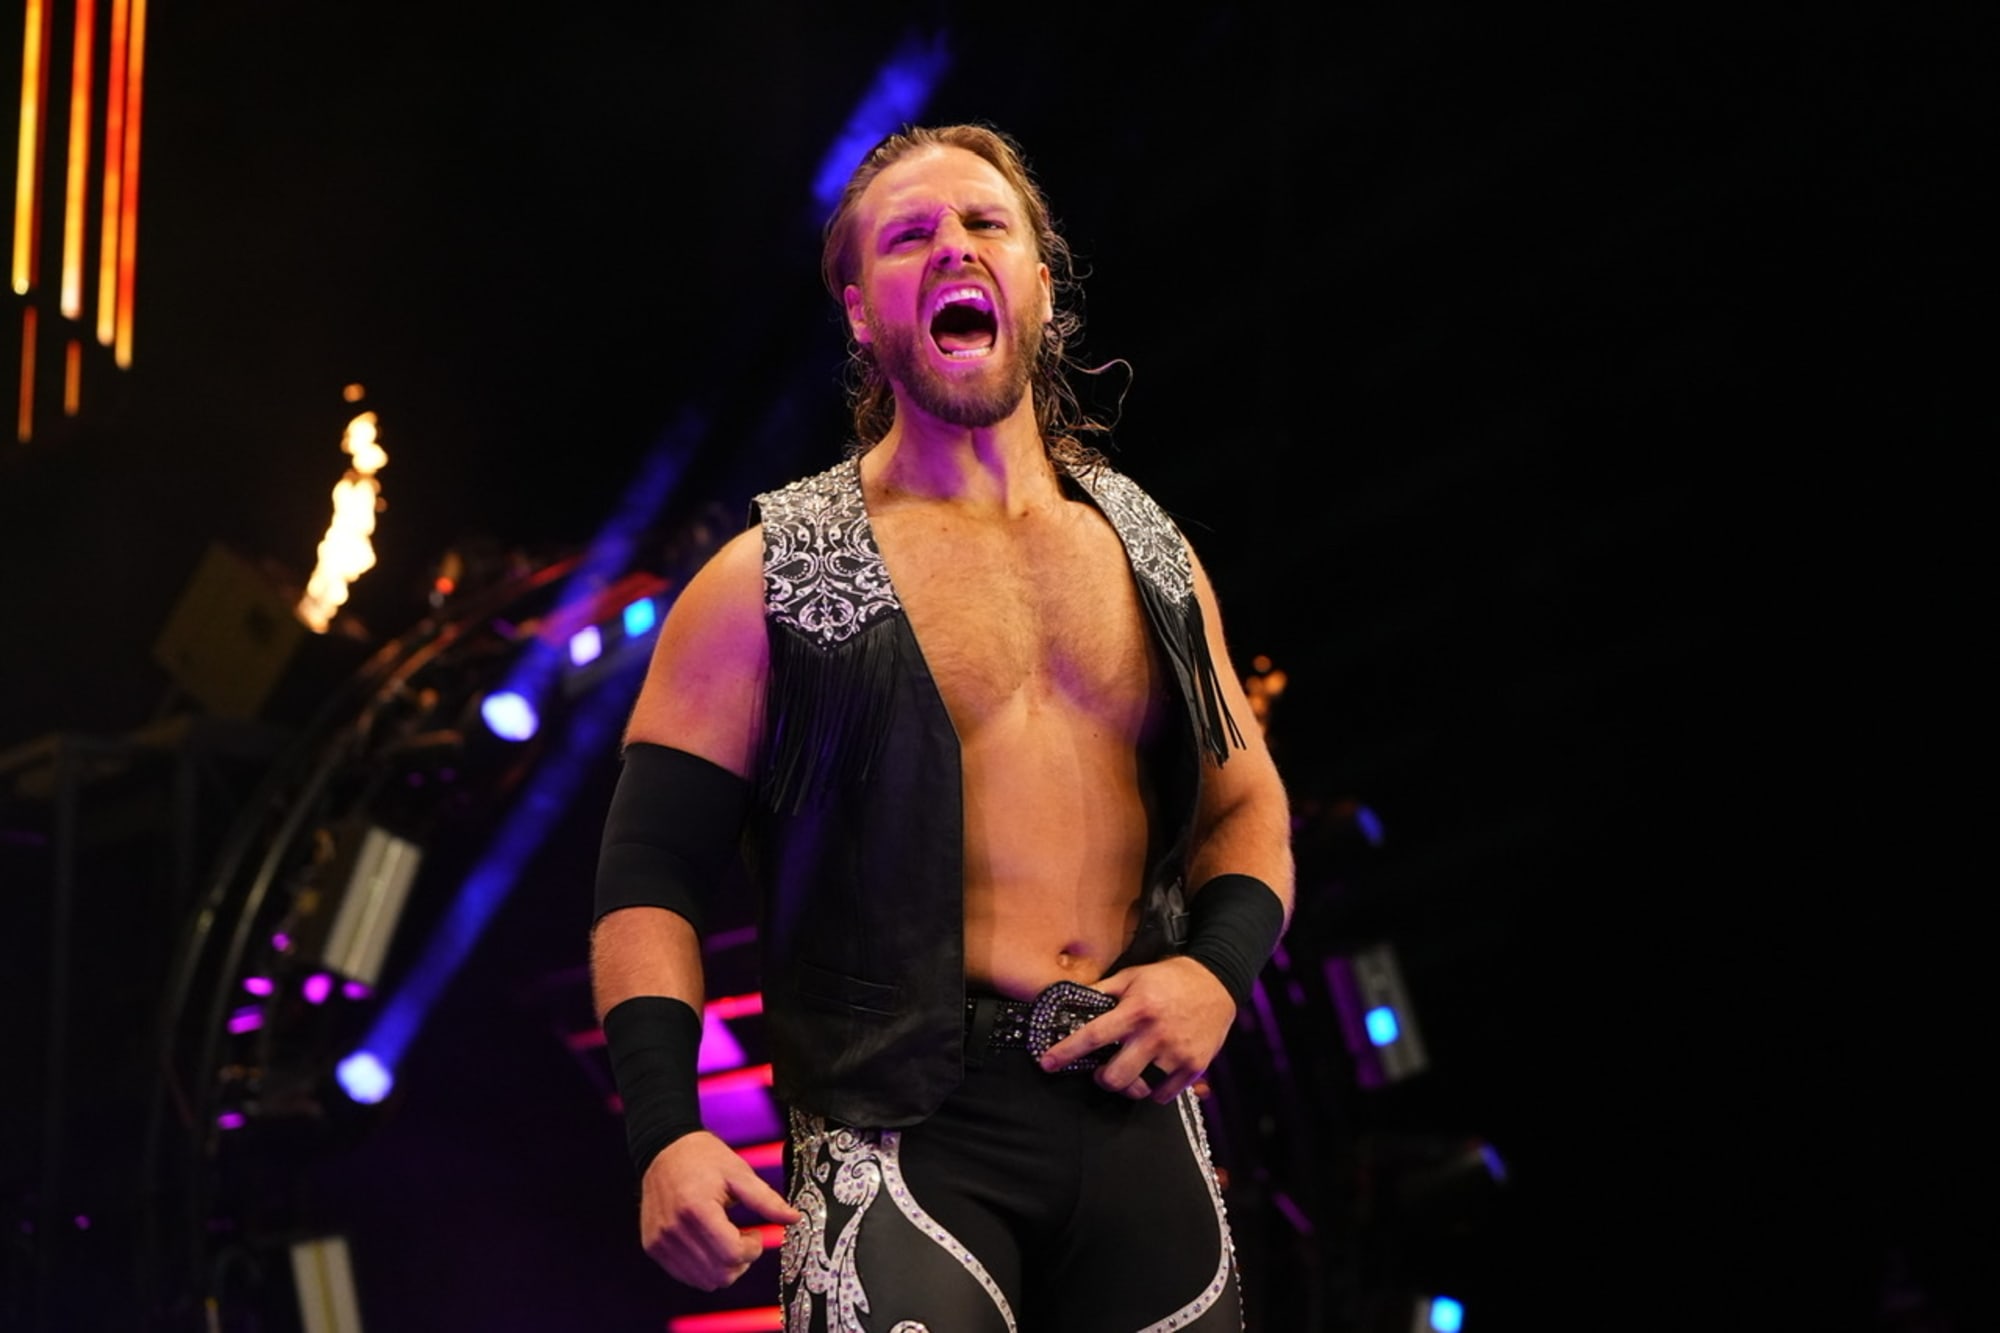 Hangman Page Sobers Up And Considers His Future On Being The Elite -  Wrestlezone